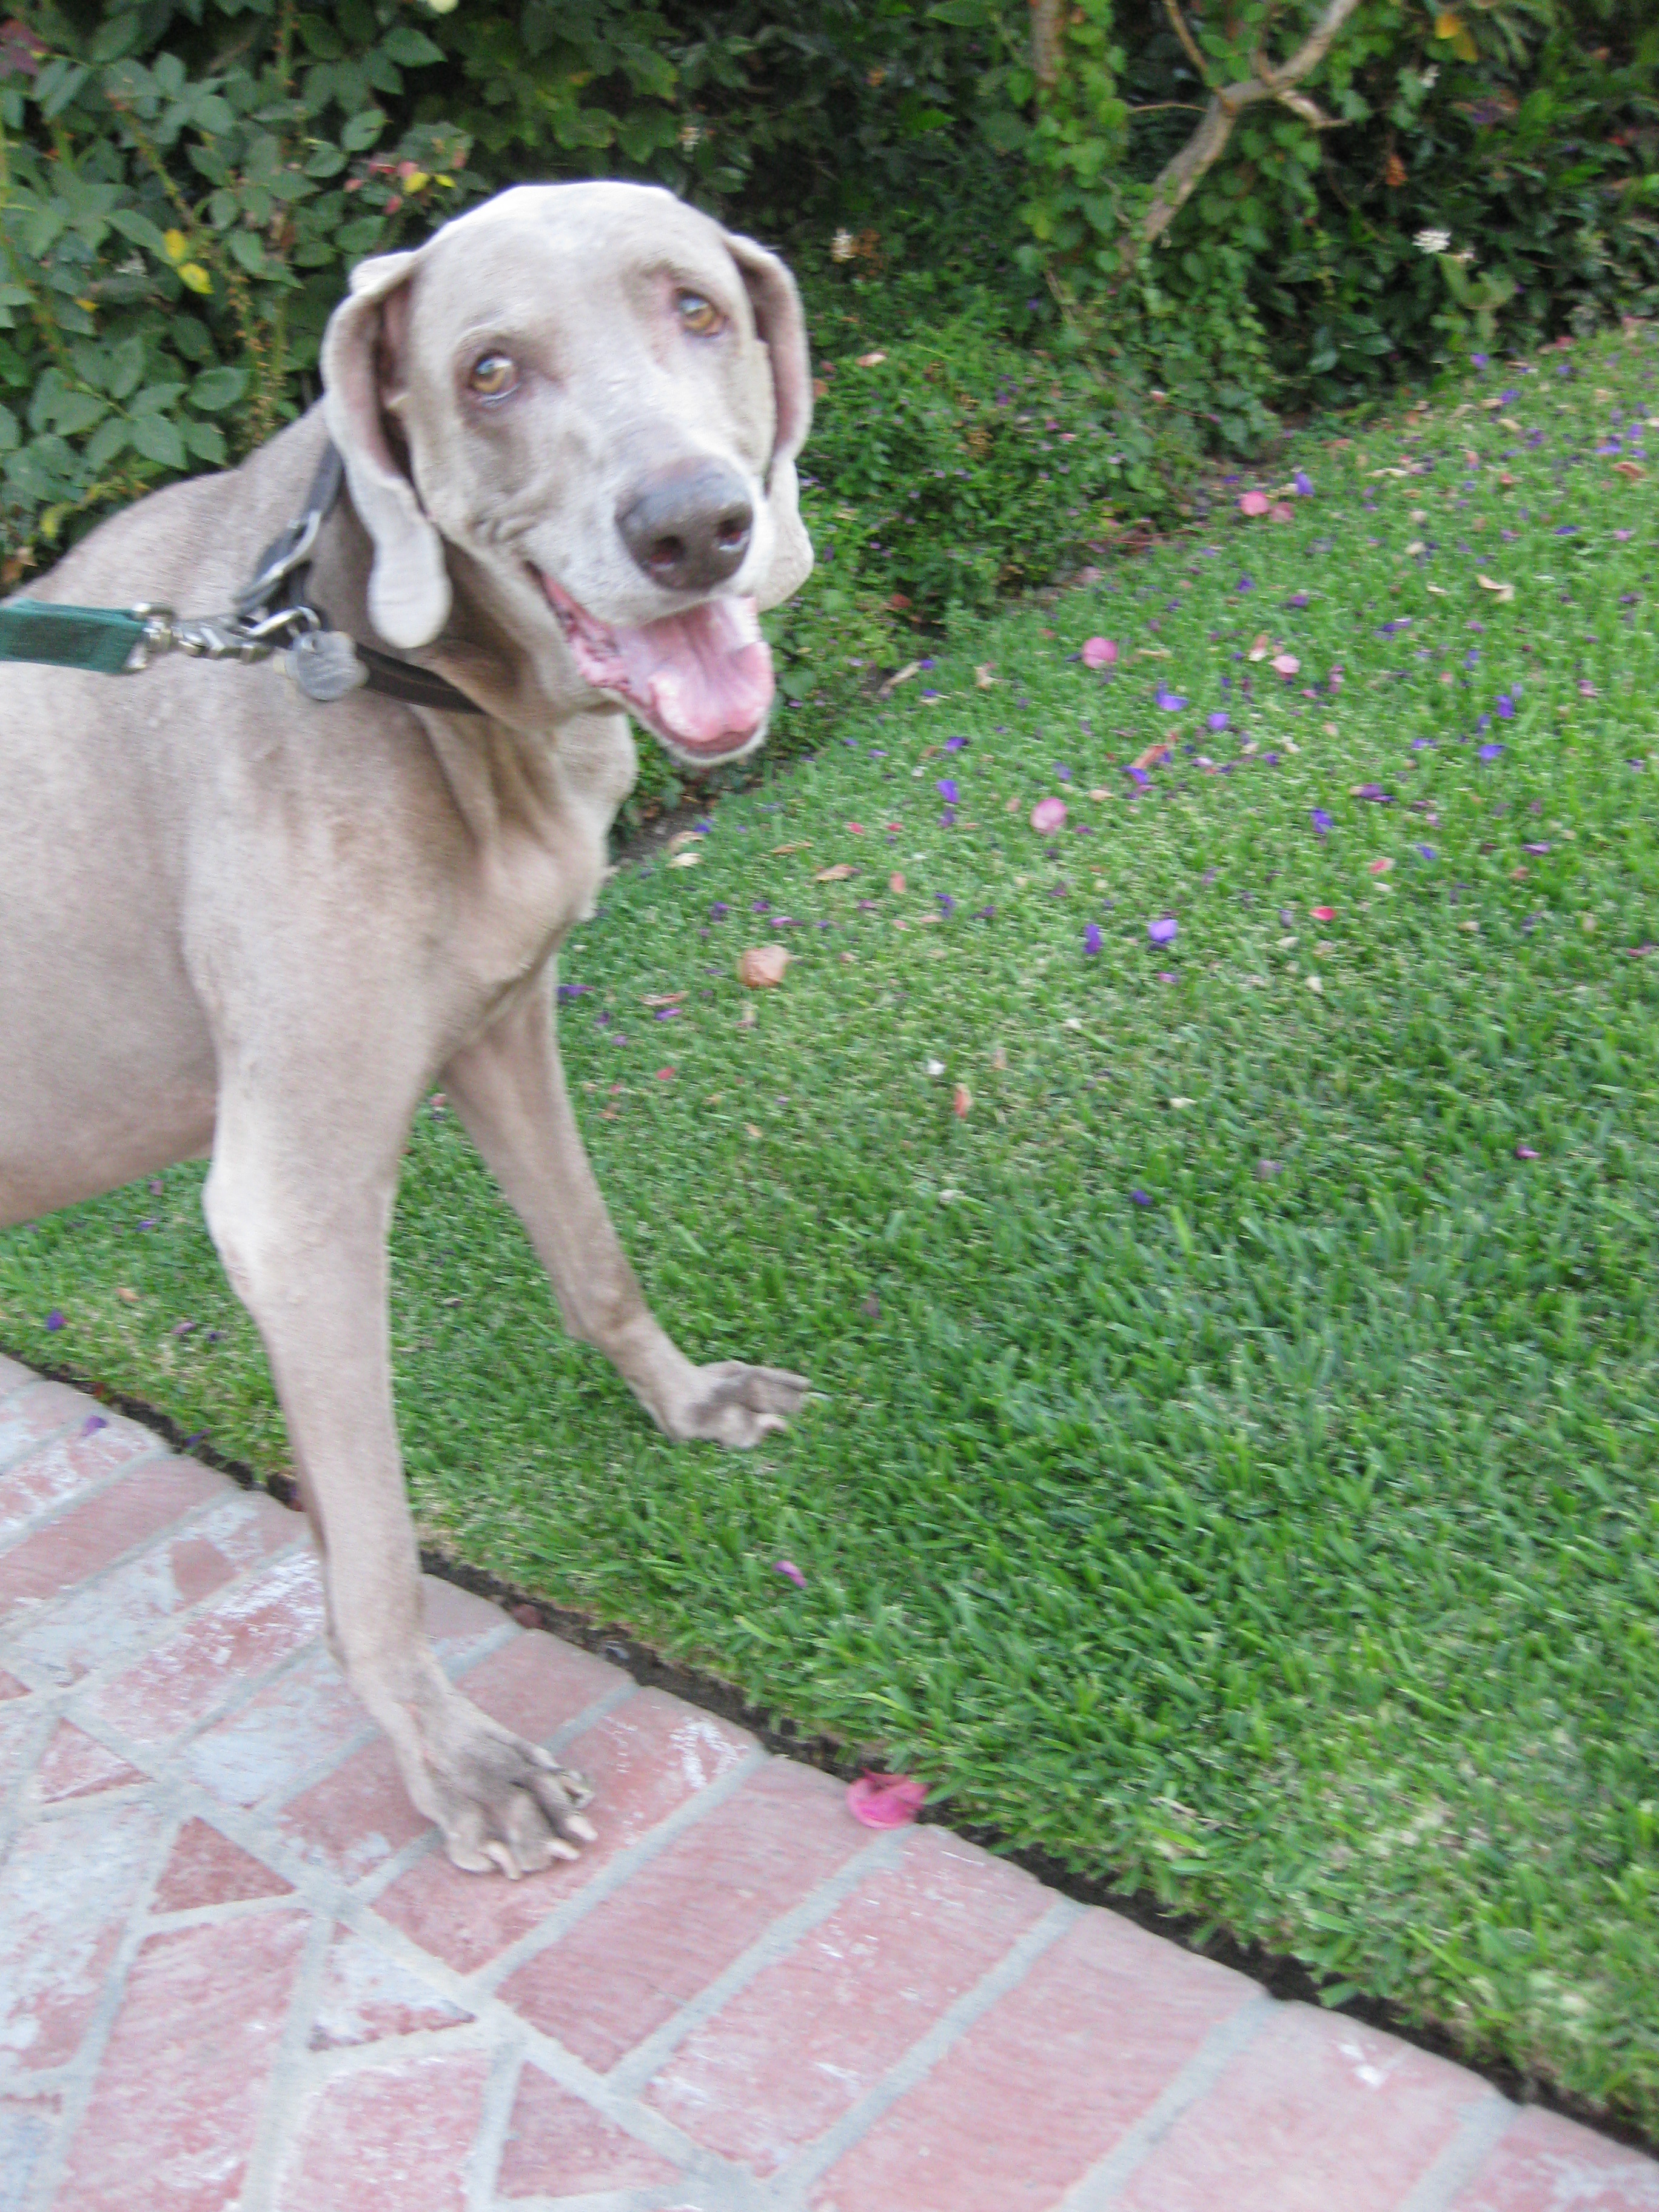 The trauma of the accident never affected Yeager's love of constantly walking,